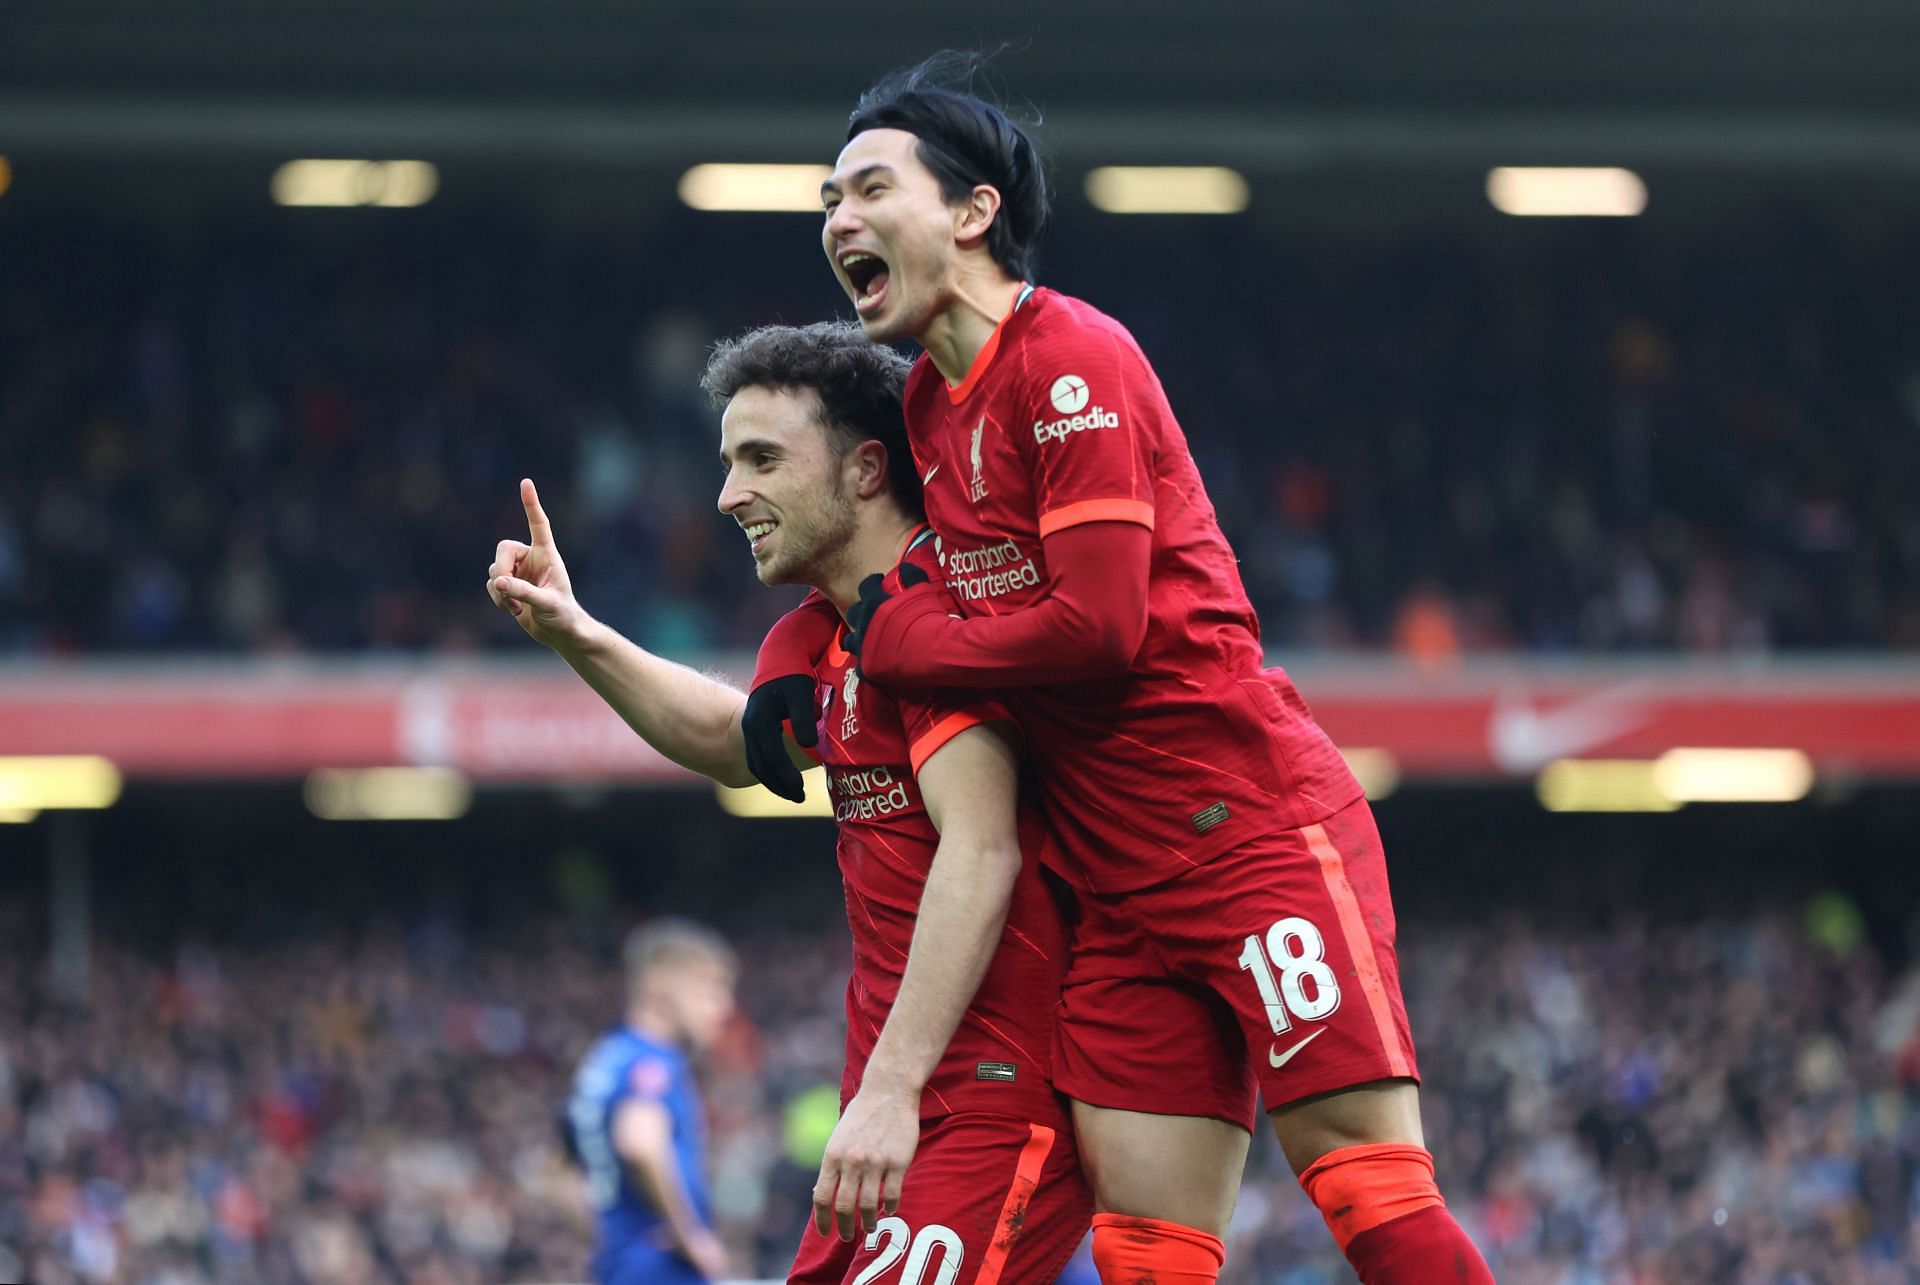 Liverpool Vs Cardiff City In This Piece We Take A Look At How The Liverpool Players Faired In